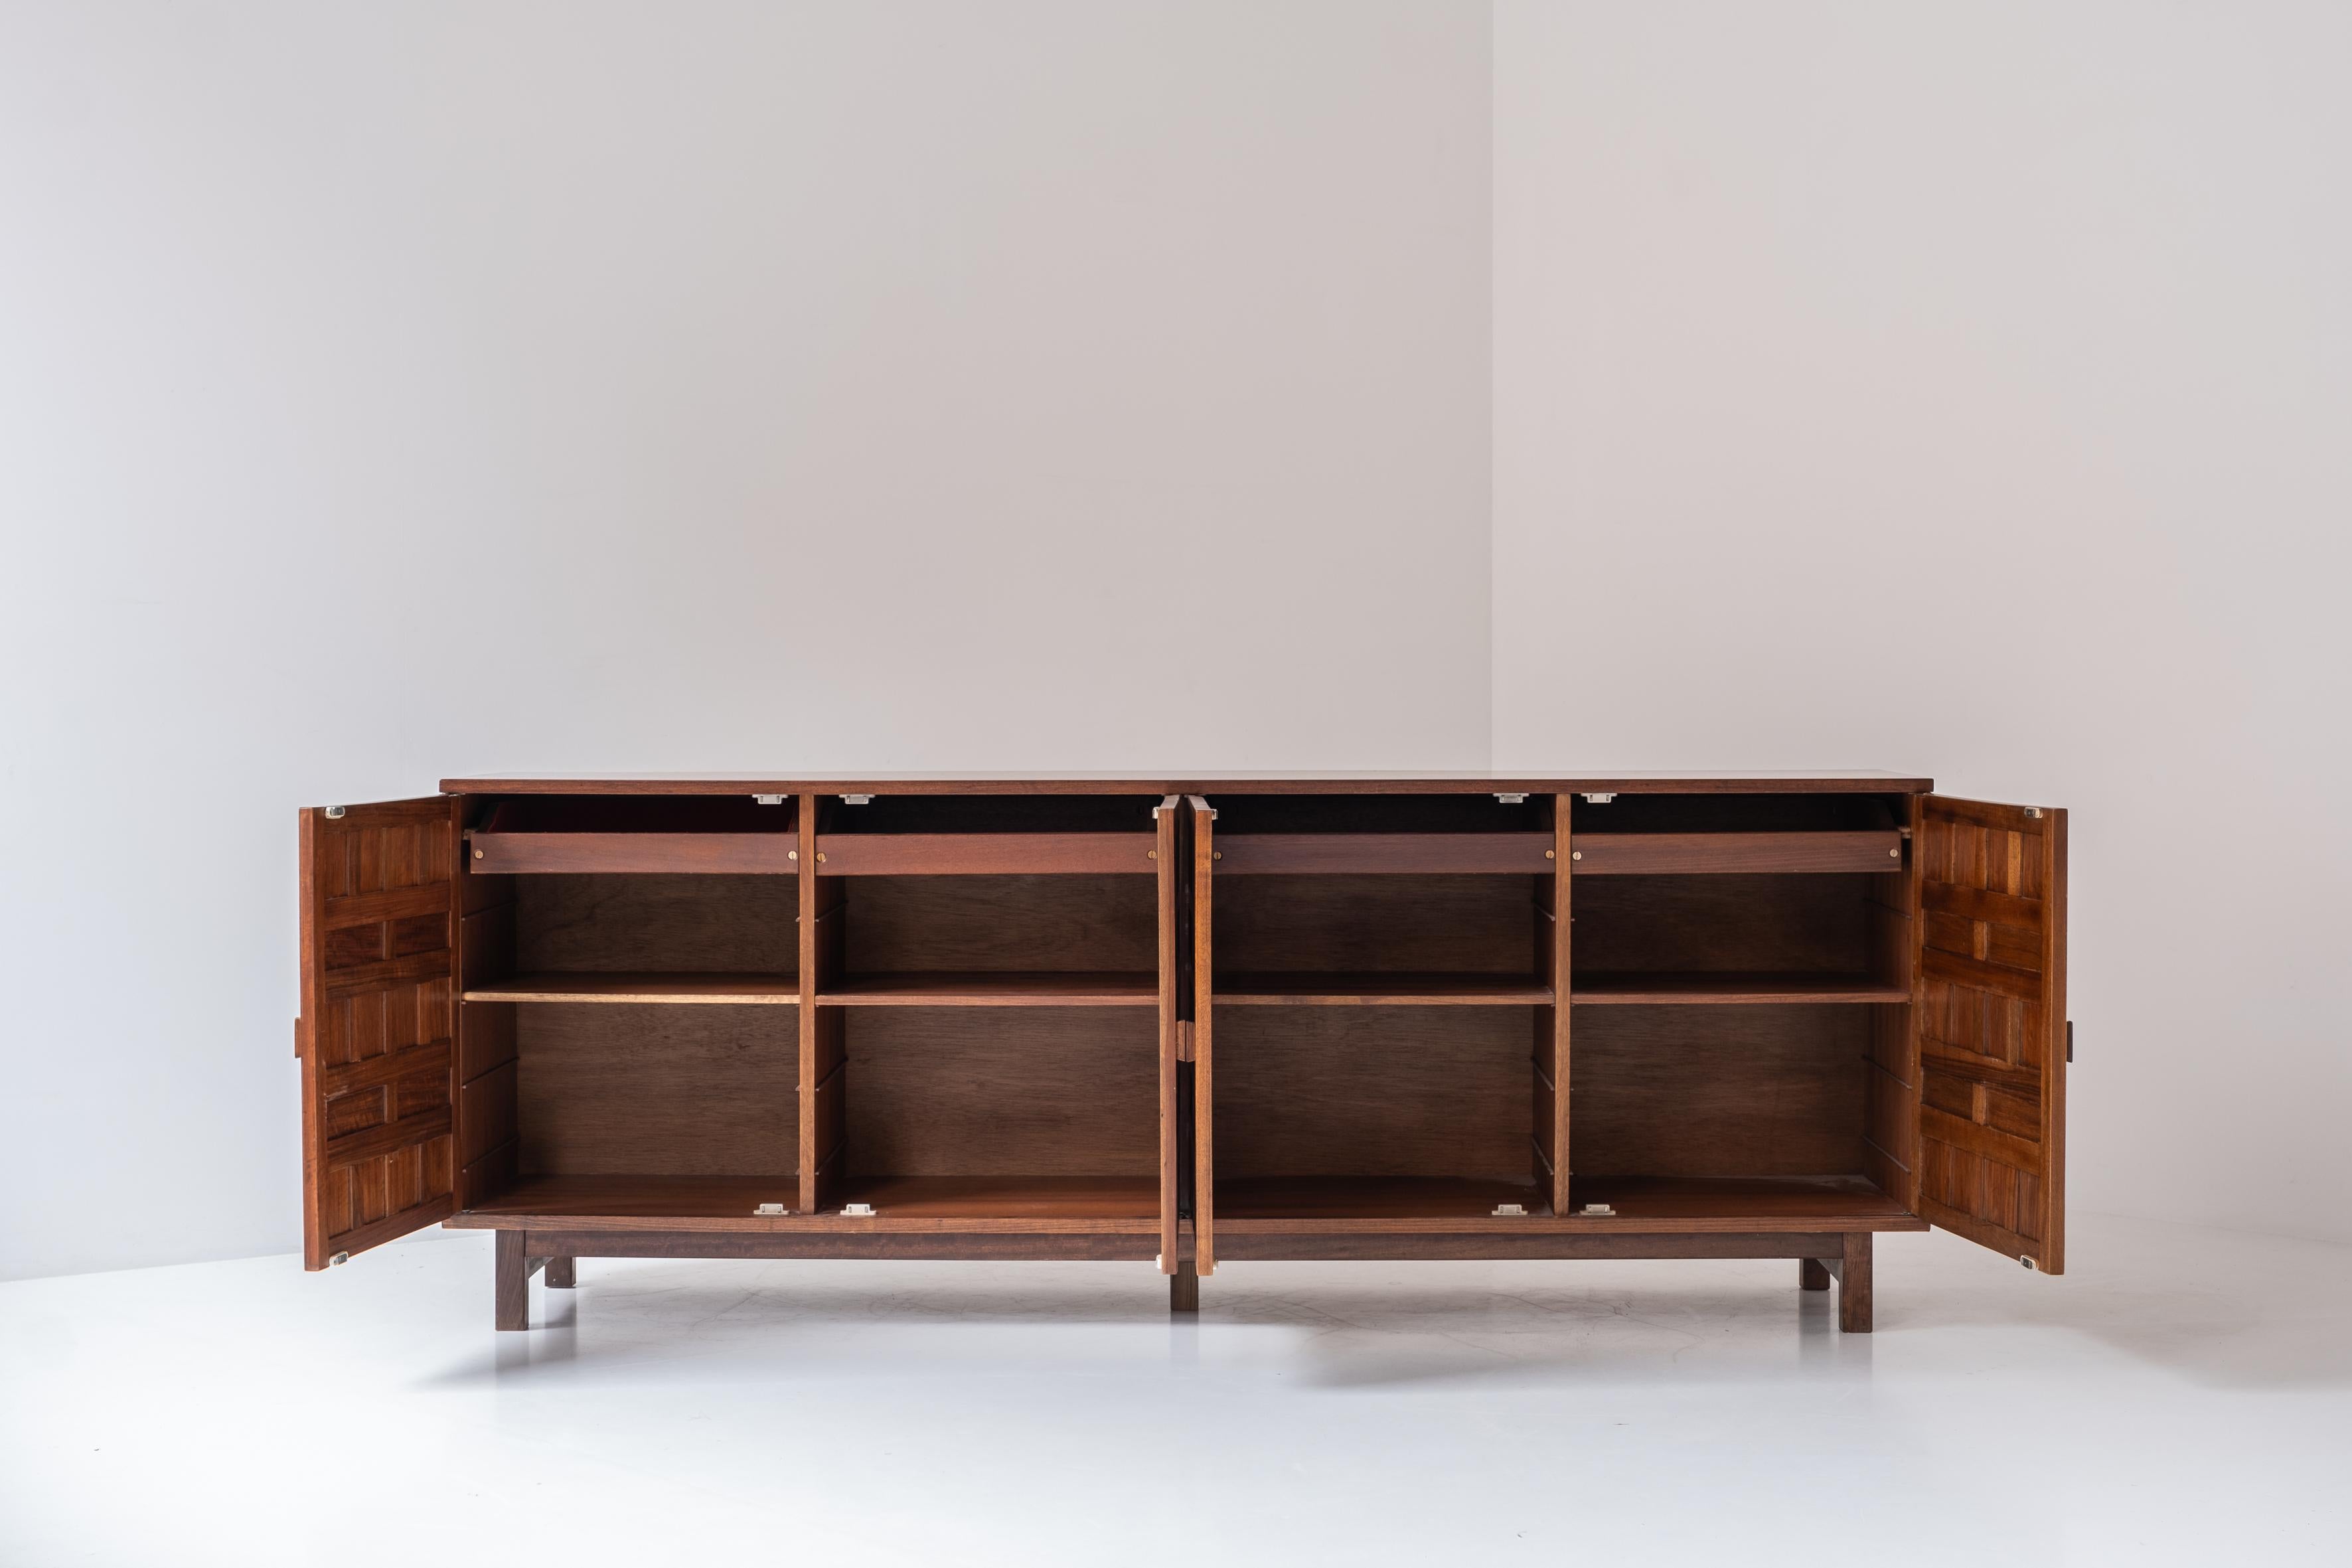 Spanish Brutalist sideboard from Spain, designed and manufactured in the 1970s.